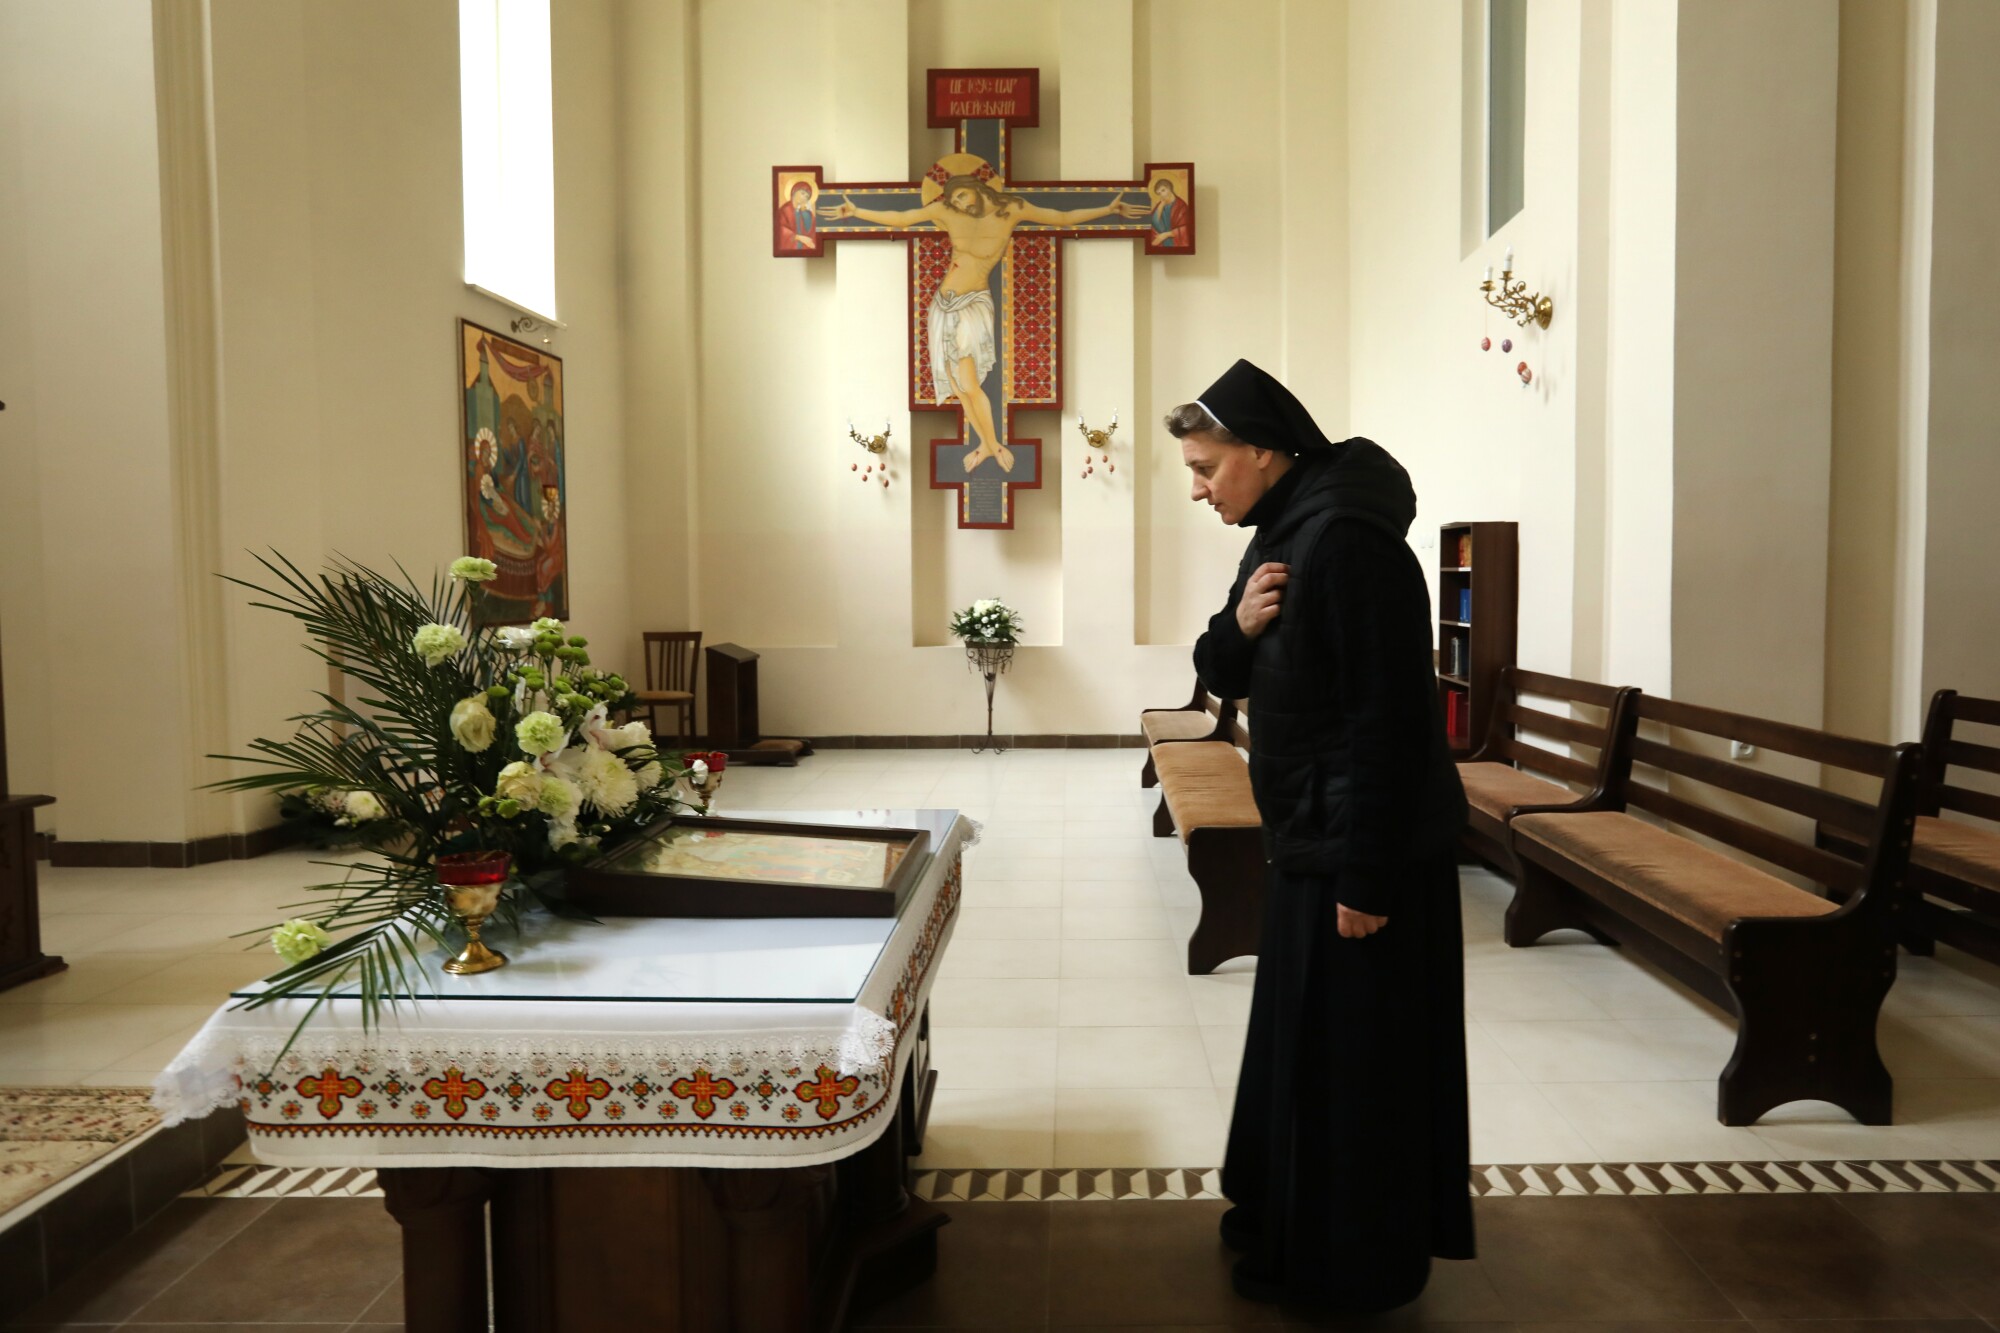 Sister Bernadette says a brief prayer in the chapel at the Sisters of the Holy Family monastery.